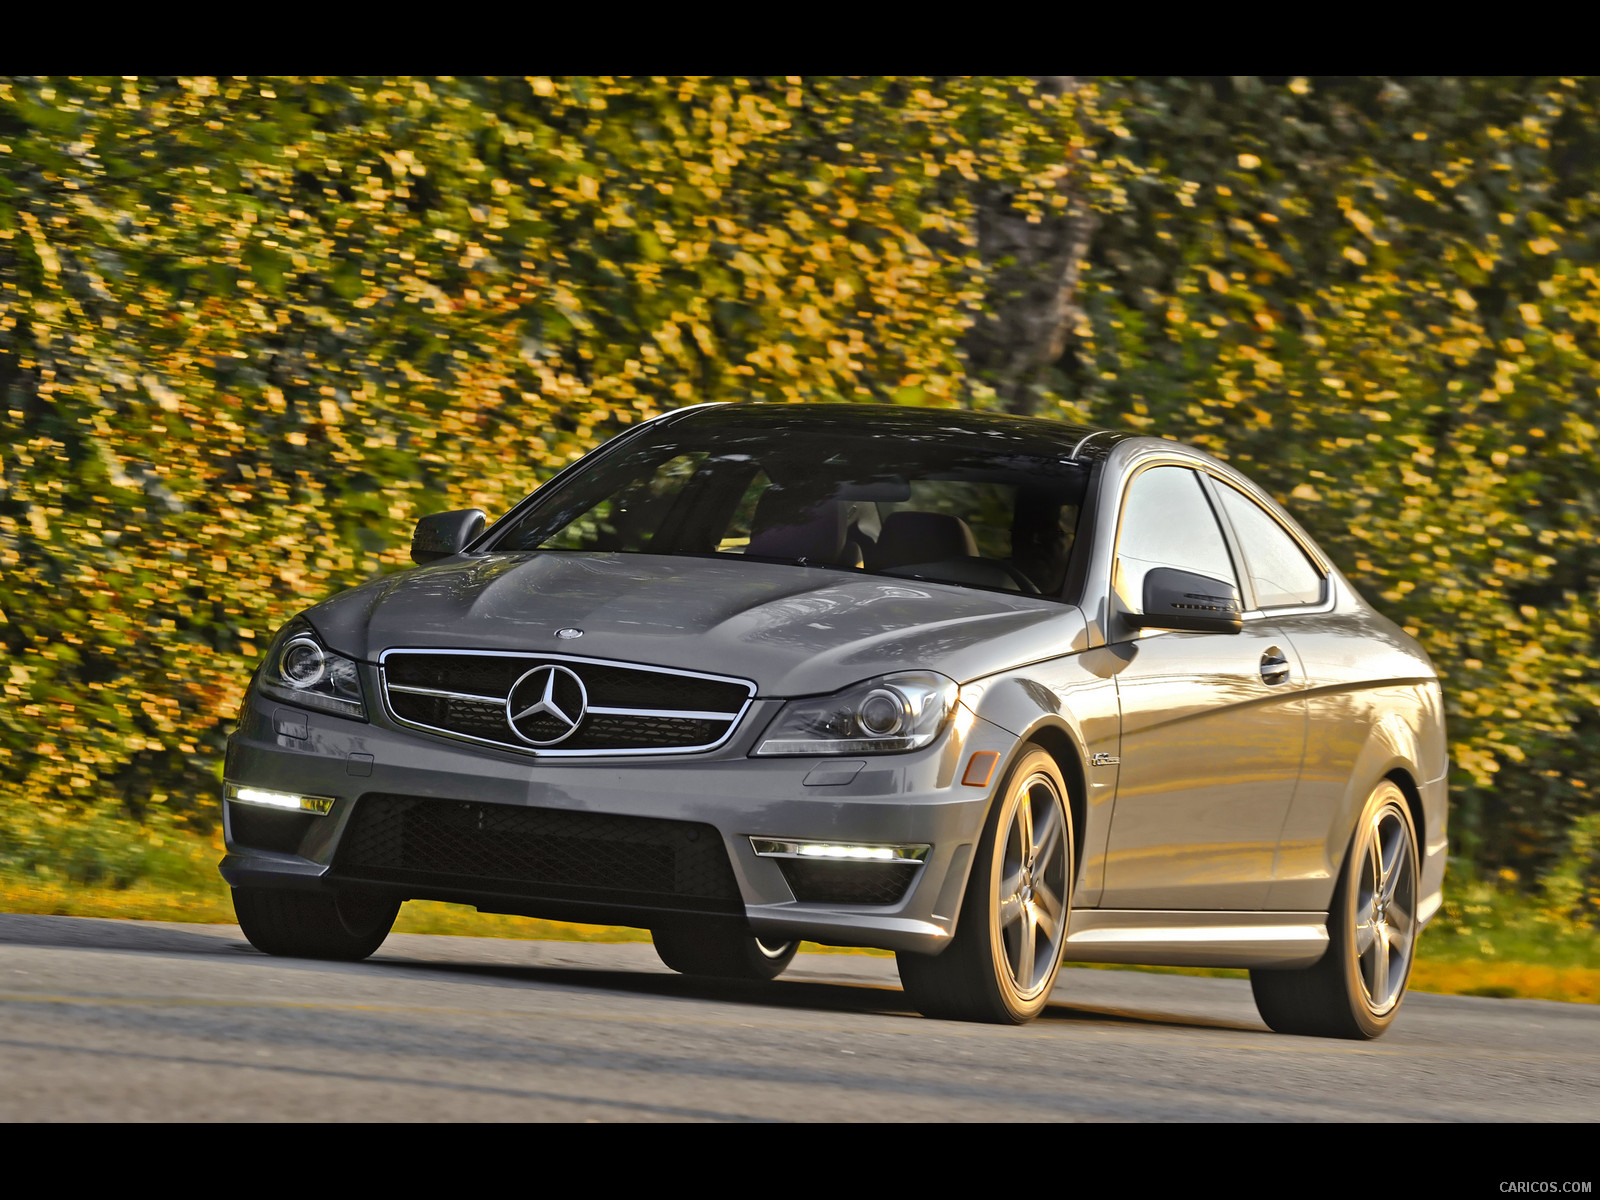 Mercedes-Benz C63 AMG Coupe (2012) with MCT transmission - , #15 of 64